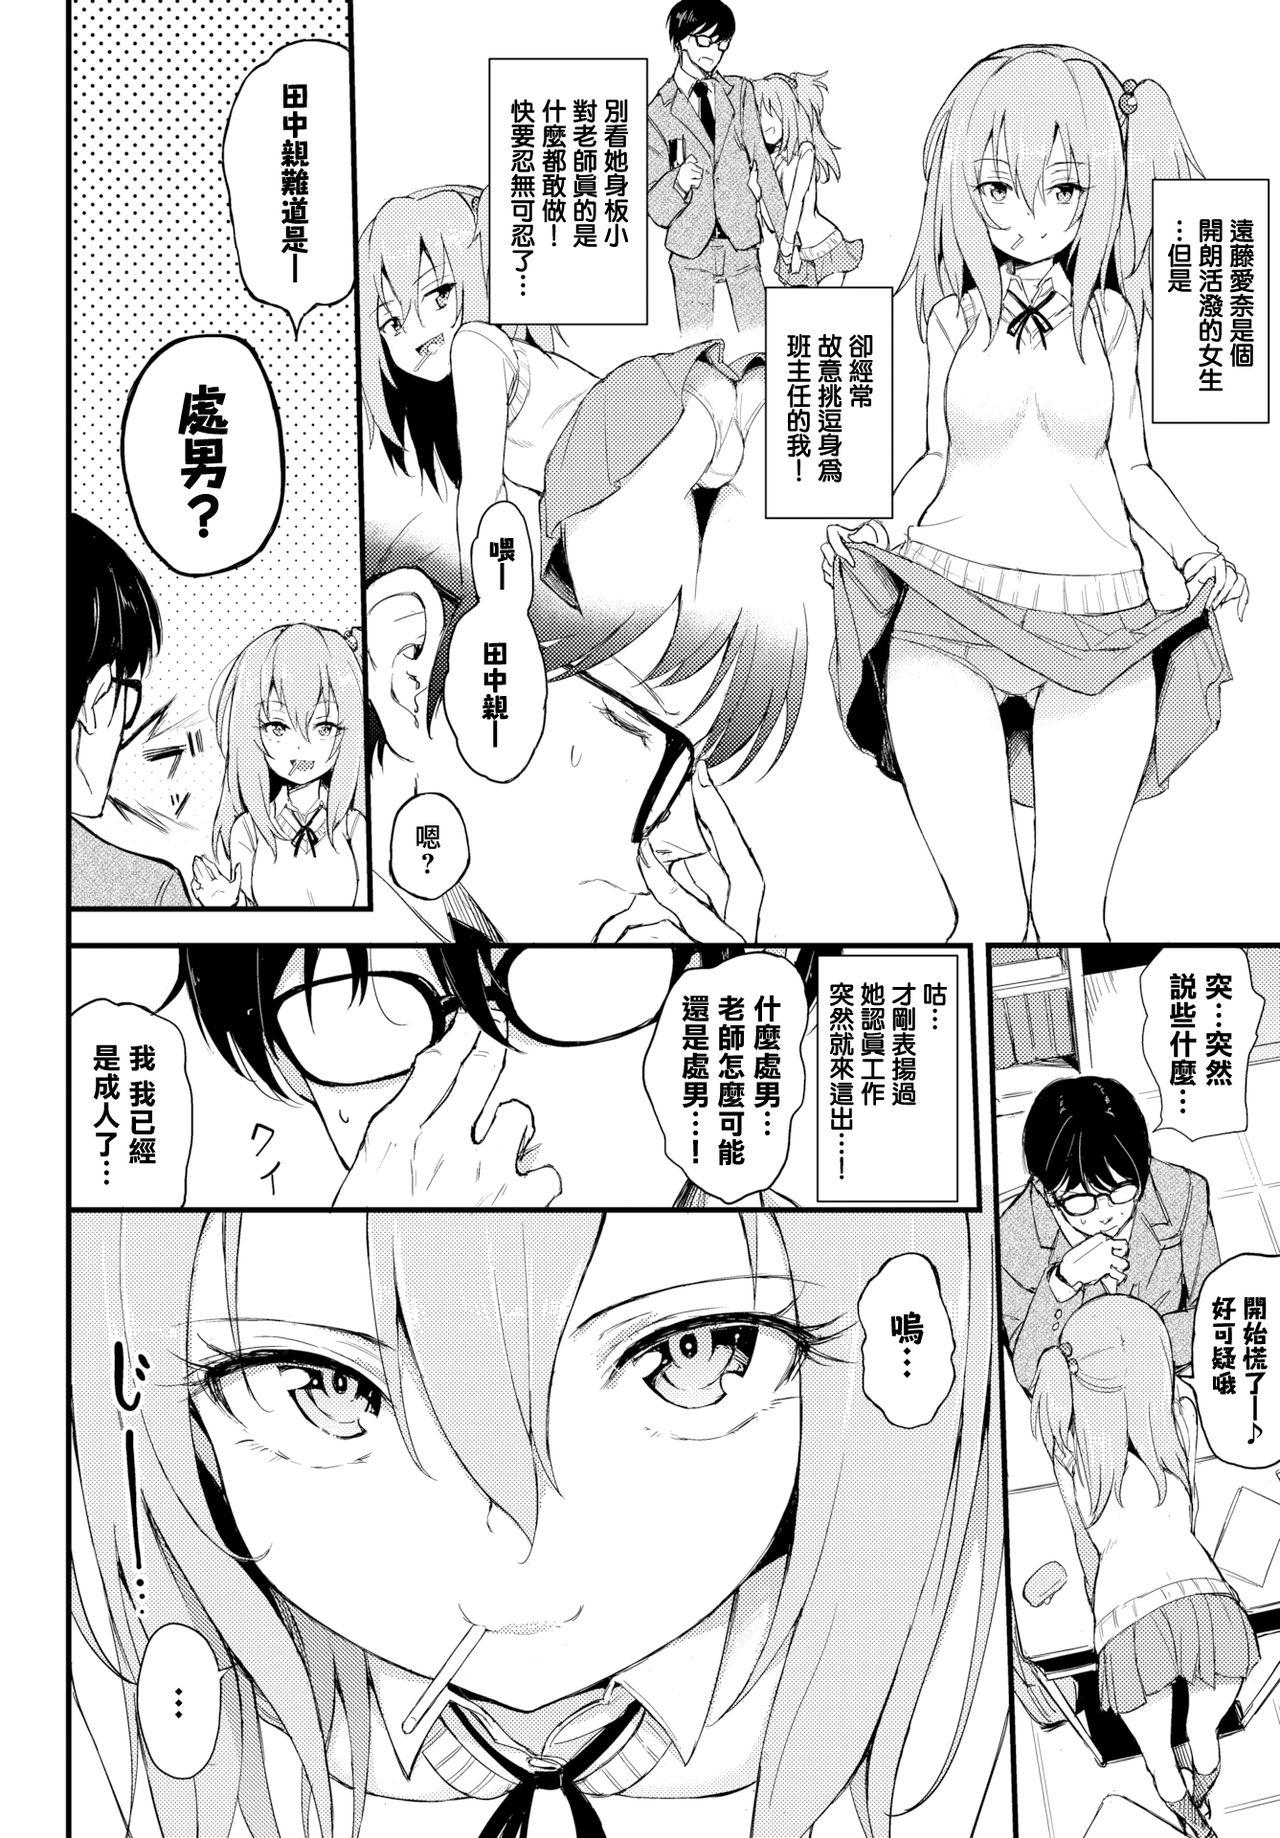 Baile Lovely Aina-chan❤ Shemale - Page 2